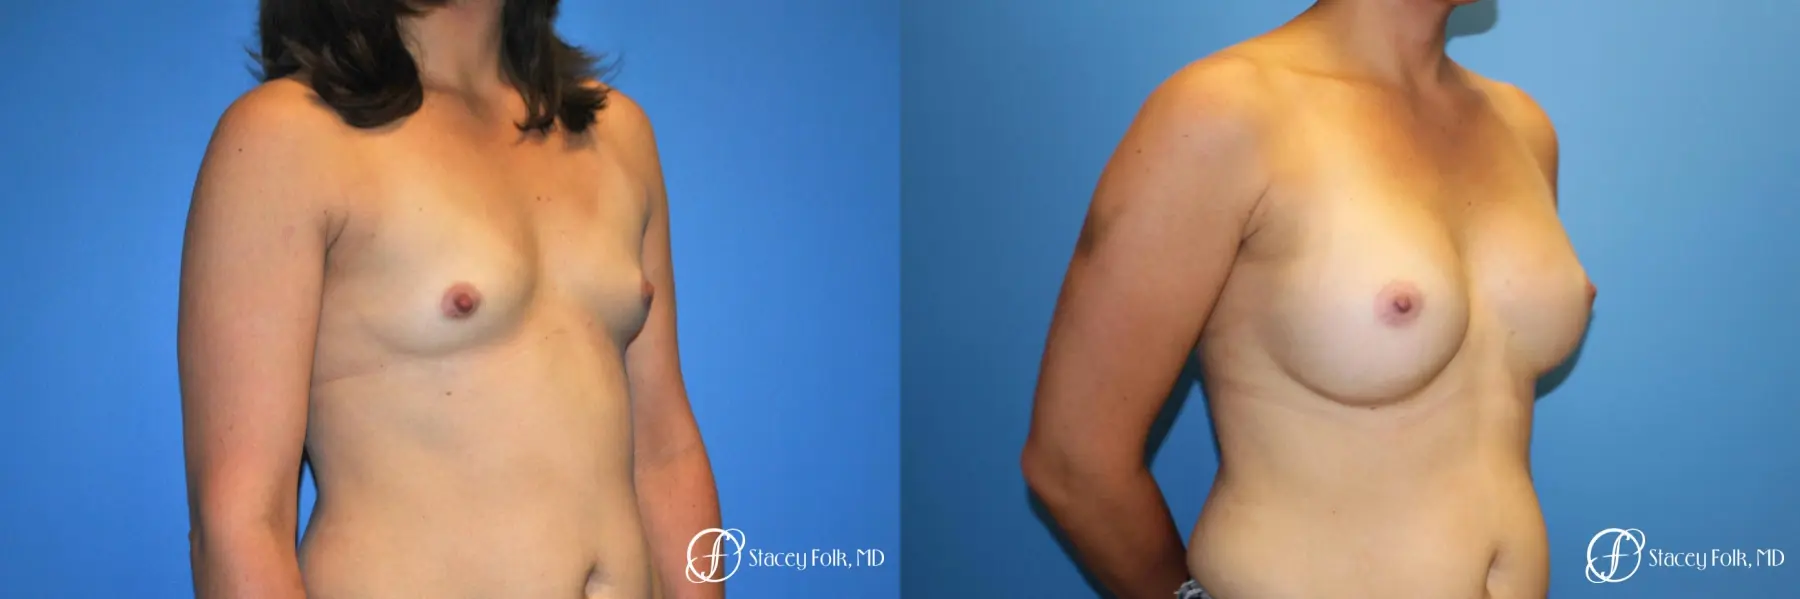 Denver Breast augmentation 7111 - Before and After 2